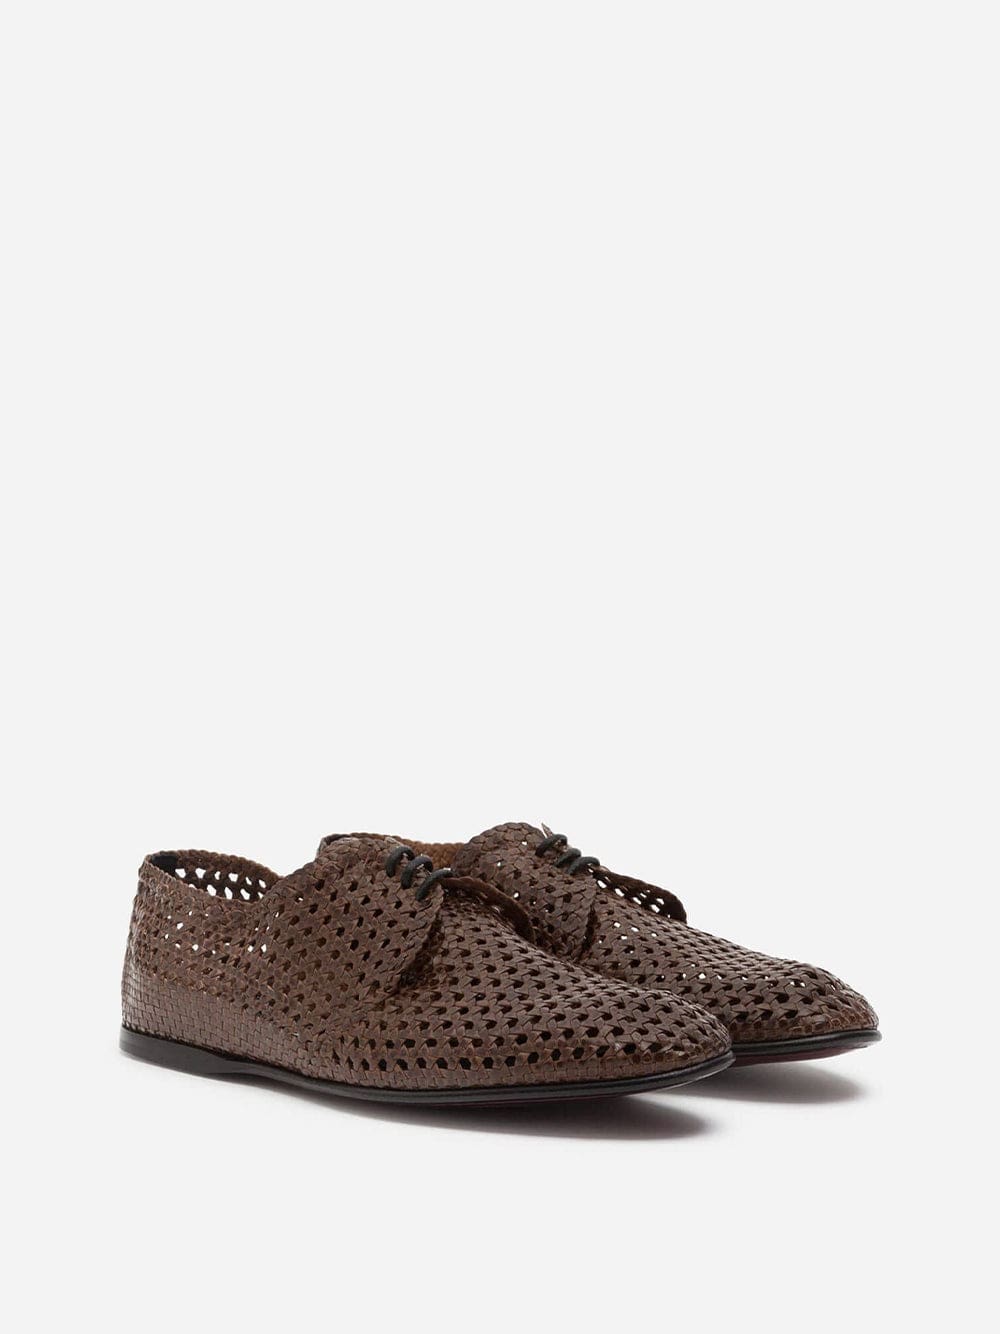 Dolce & Gabbana Hand-Woven Derby Shoes